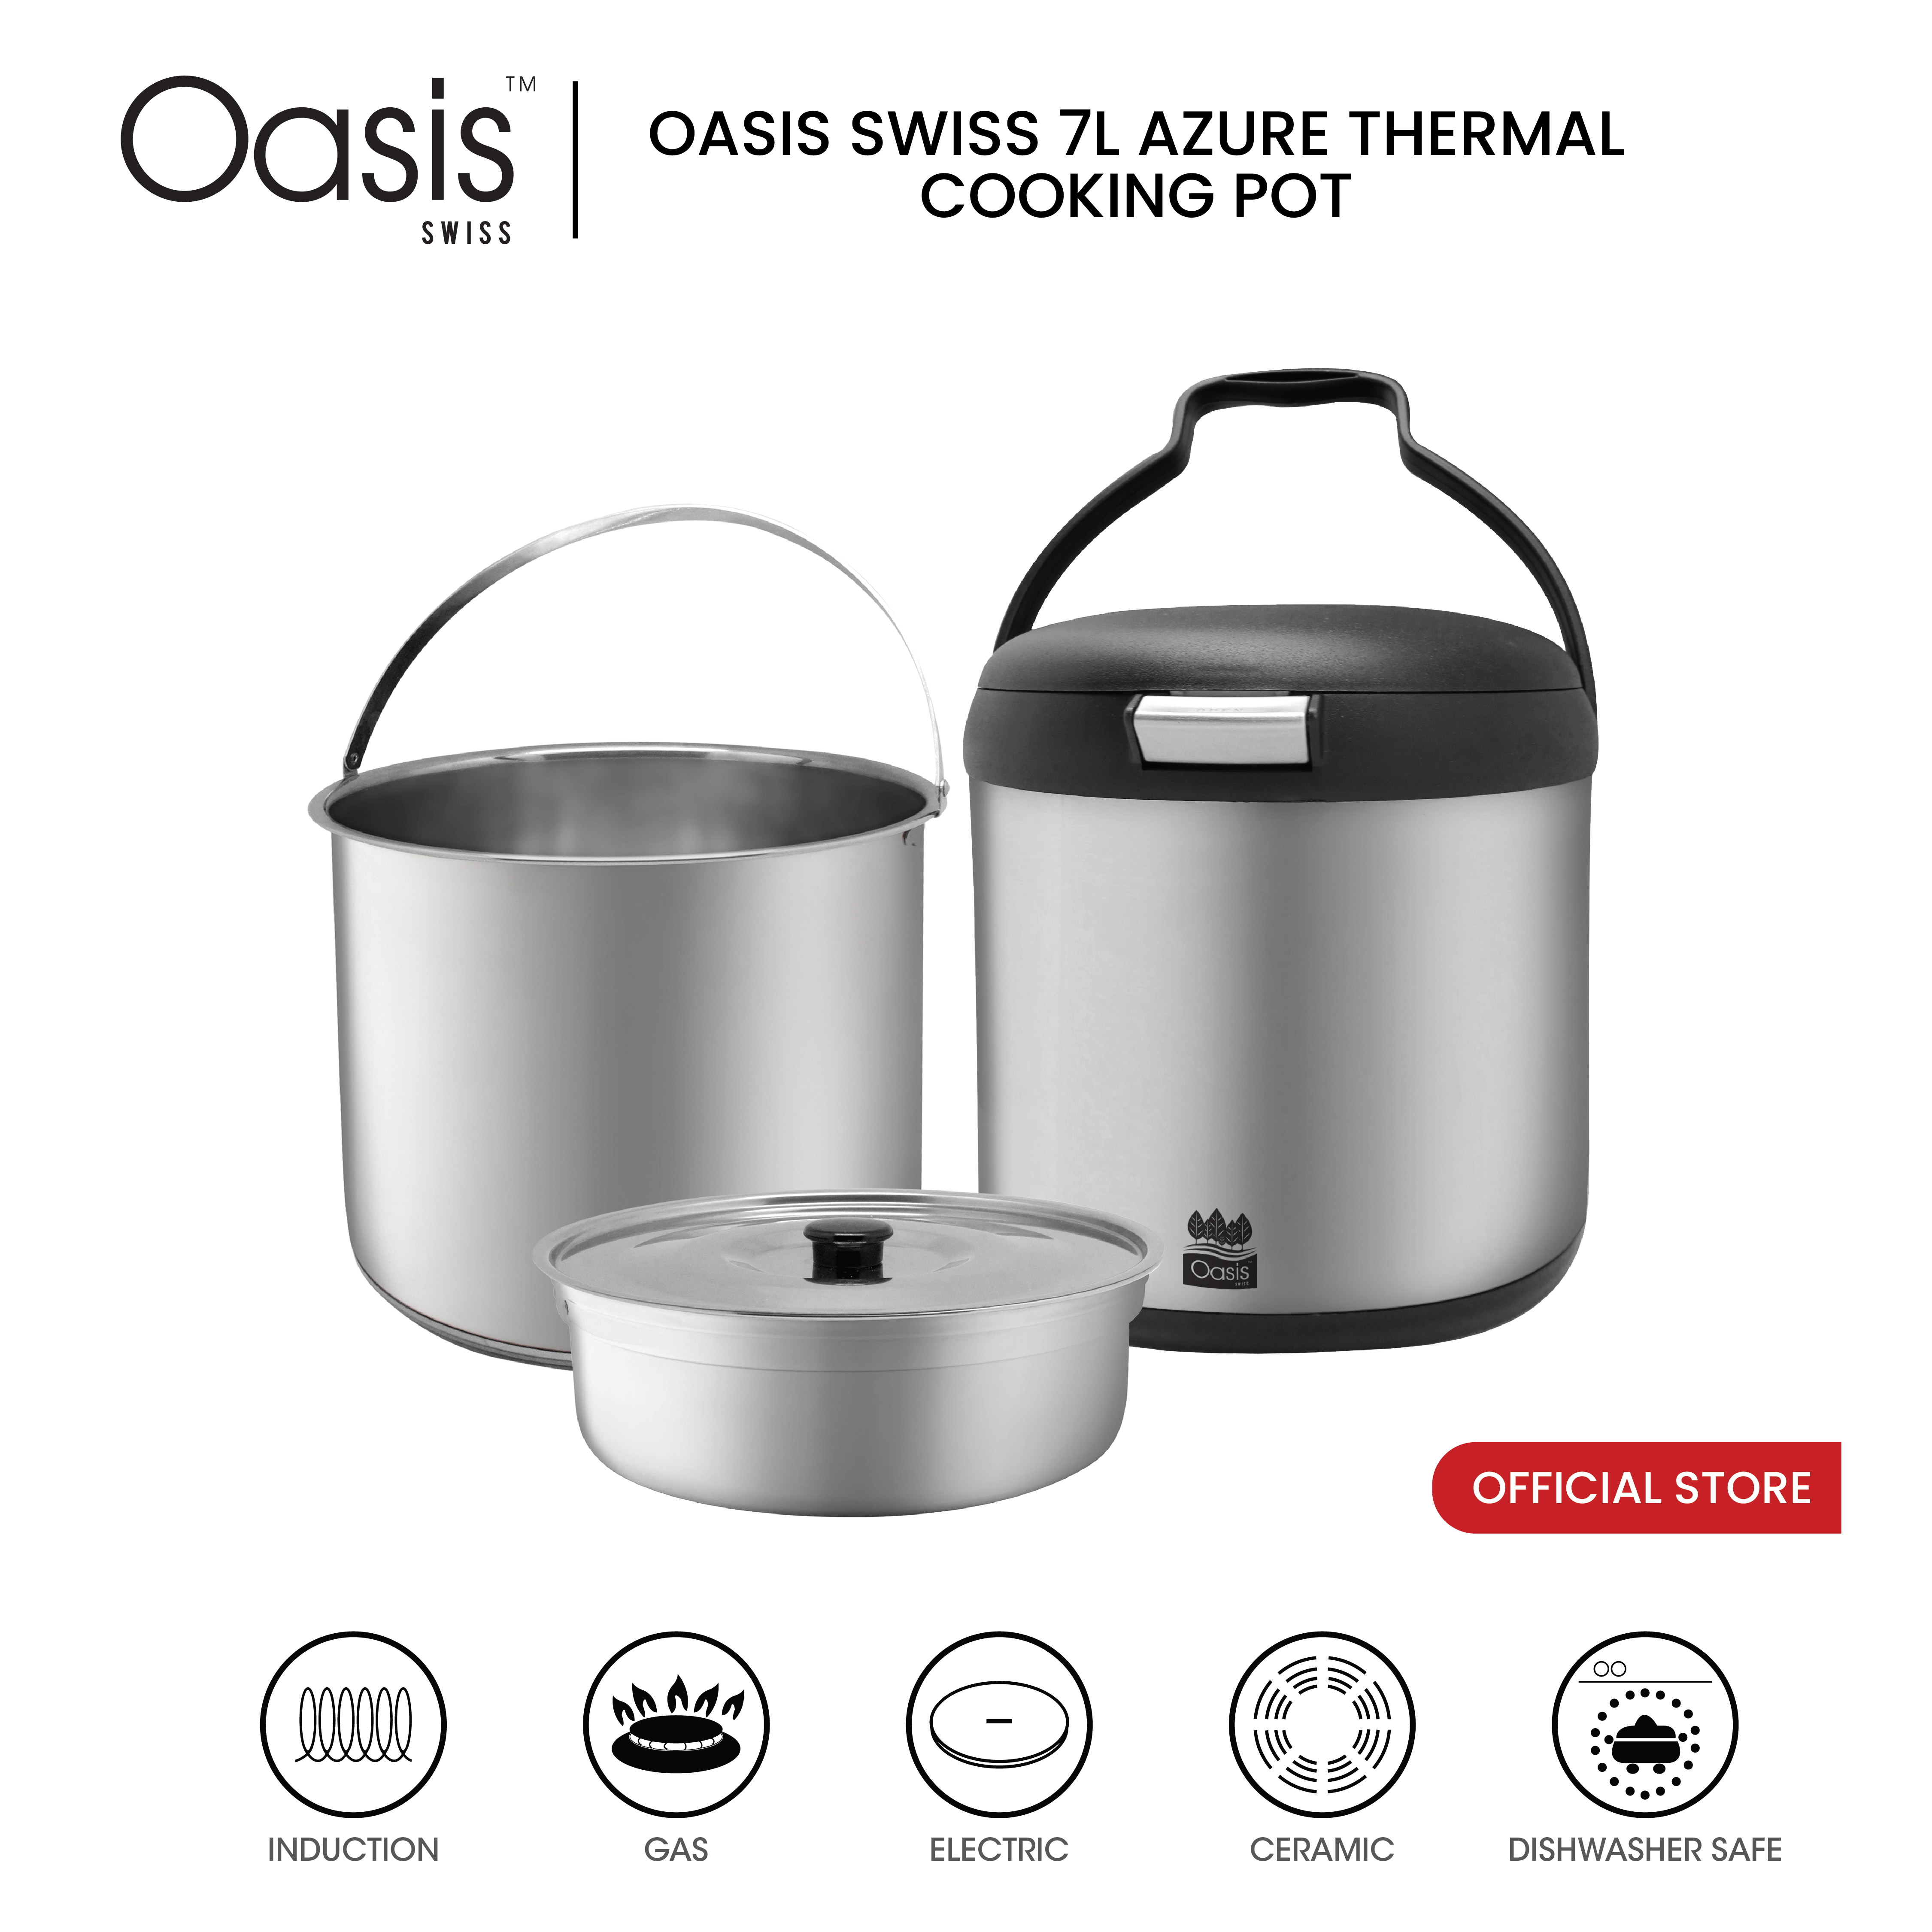 [OASIS SWISS] OASIS 7L AZURE THERMAL COOKING POT - TC700